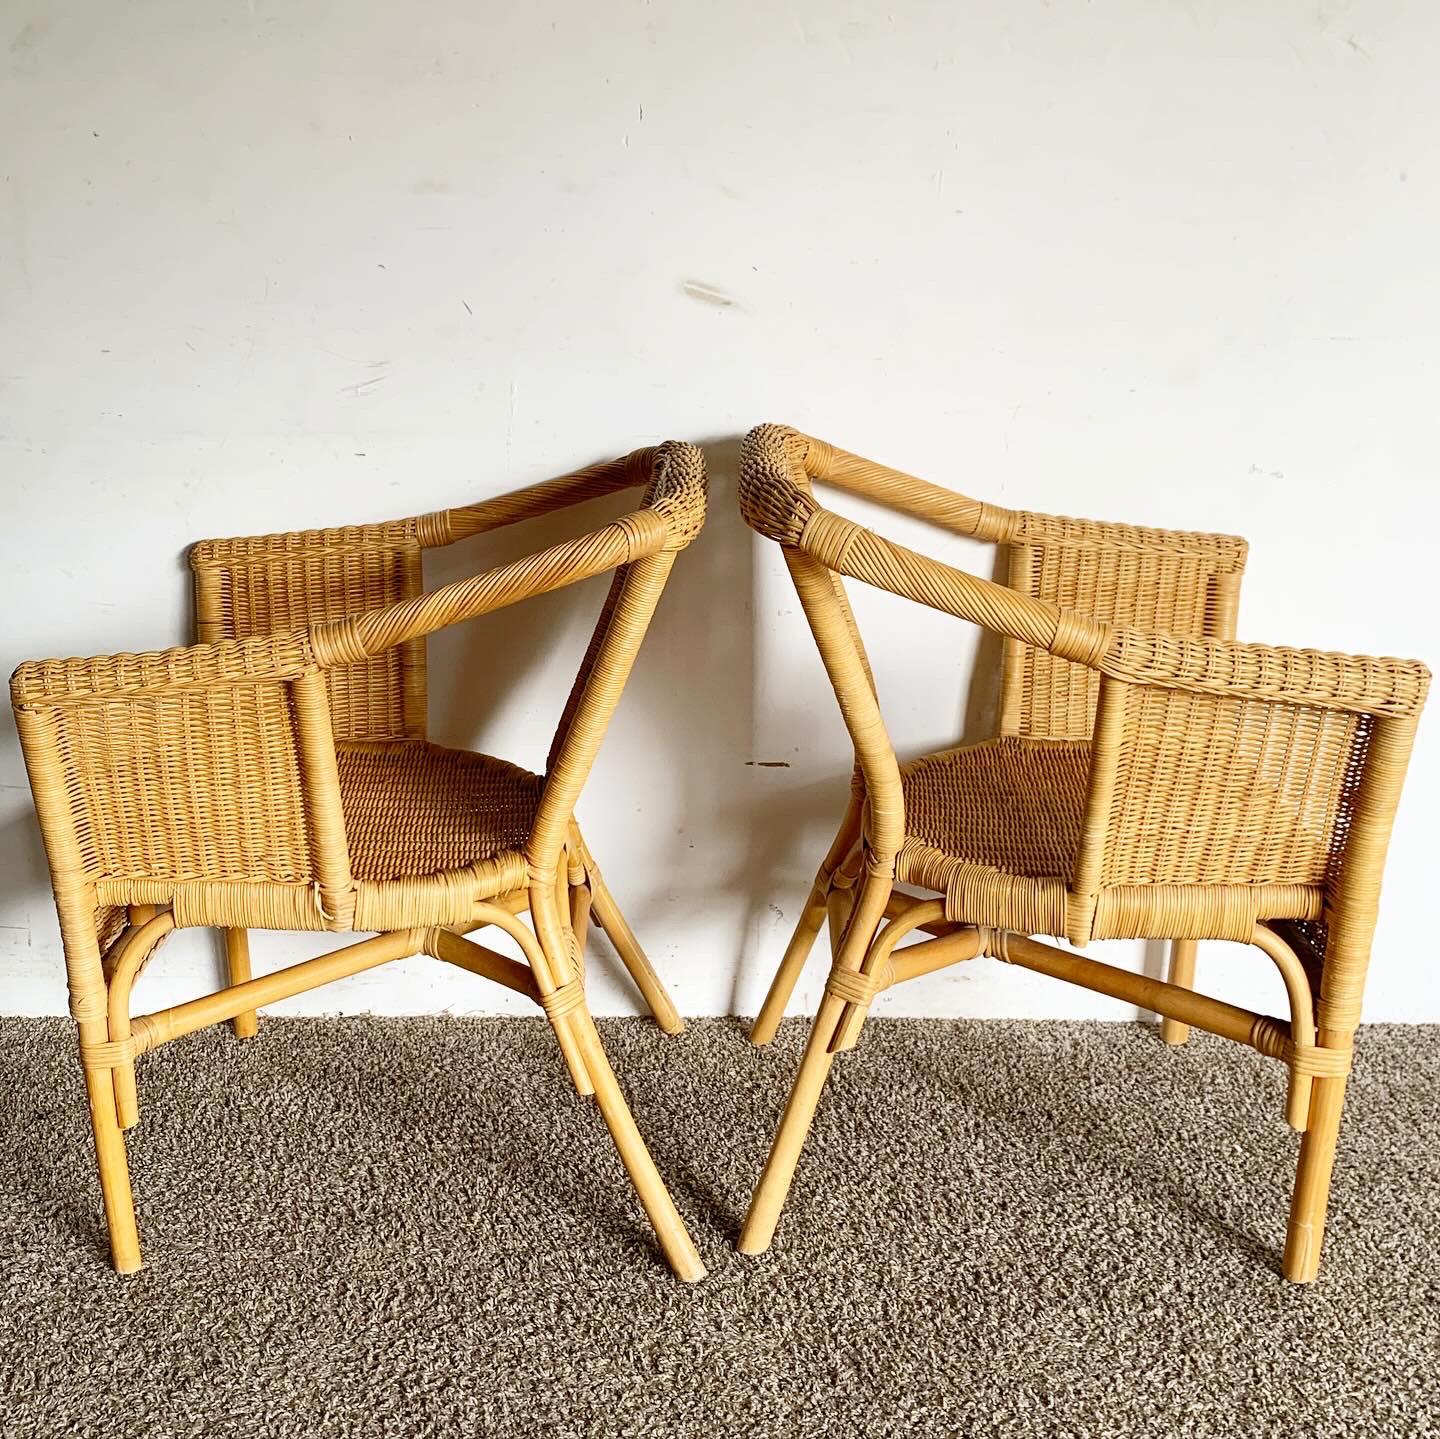 Boho Chic Wicker and Rattan Dining Arm Chairs - Set of 4 In Good Condition For Sale In Delray Beach, FL